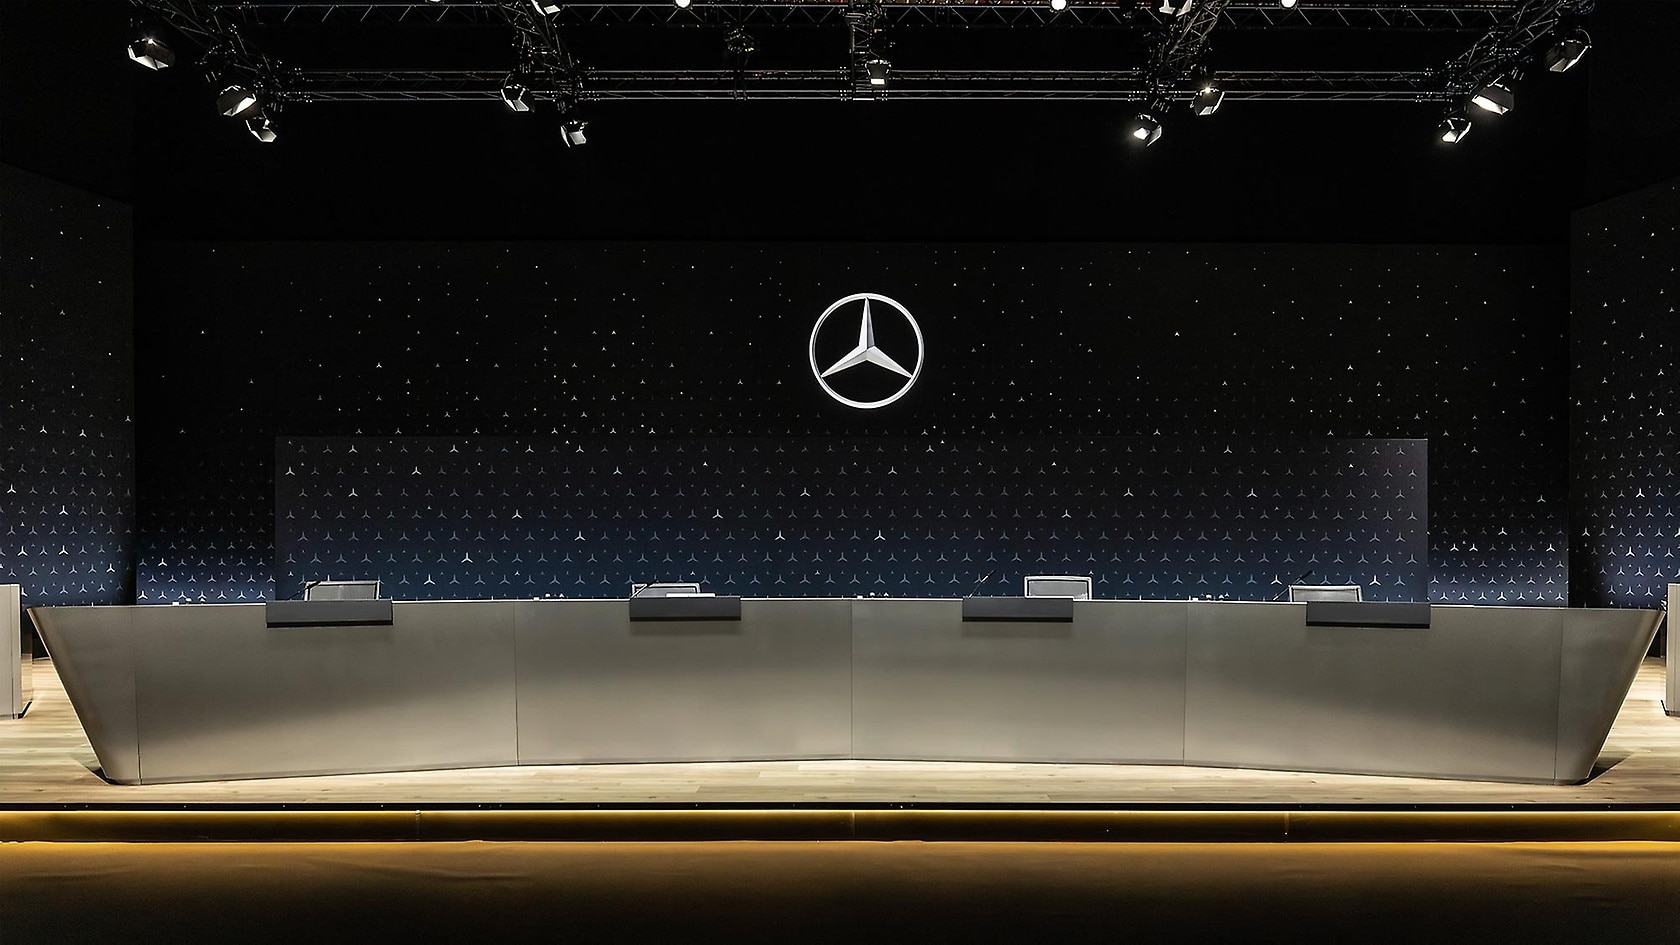 Mercedes-Benz Annual General Meeting.